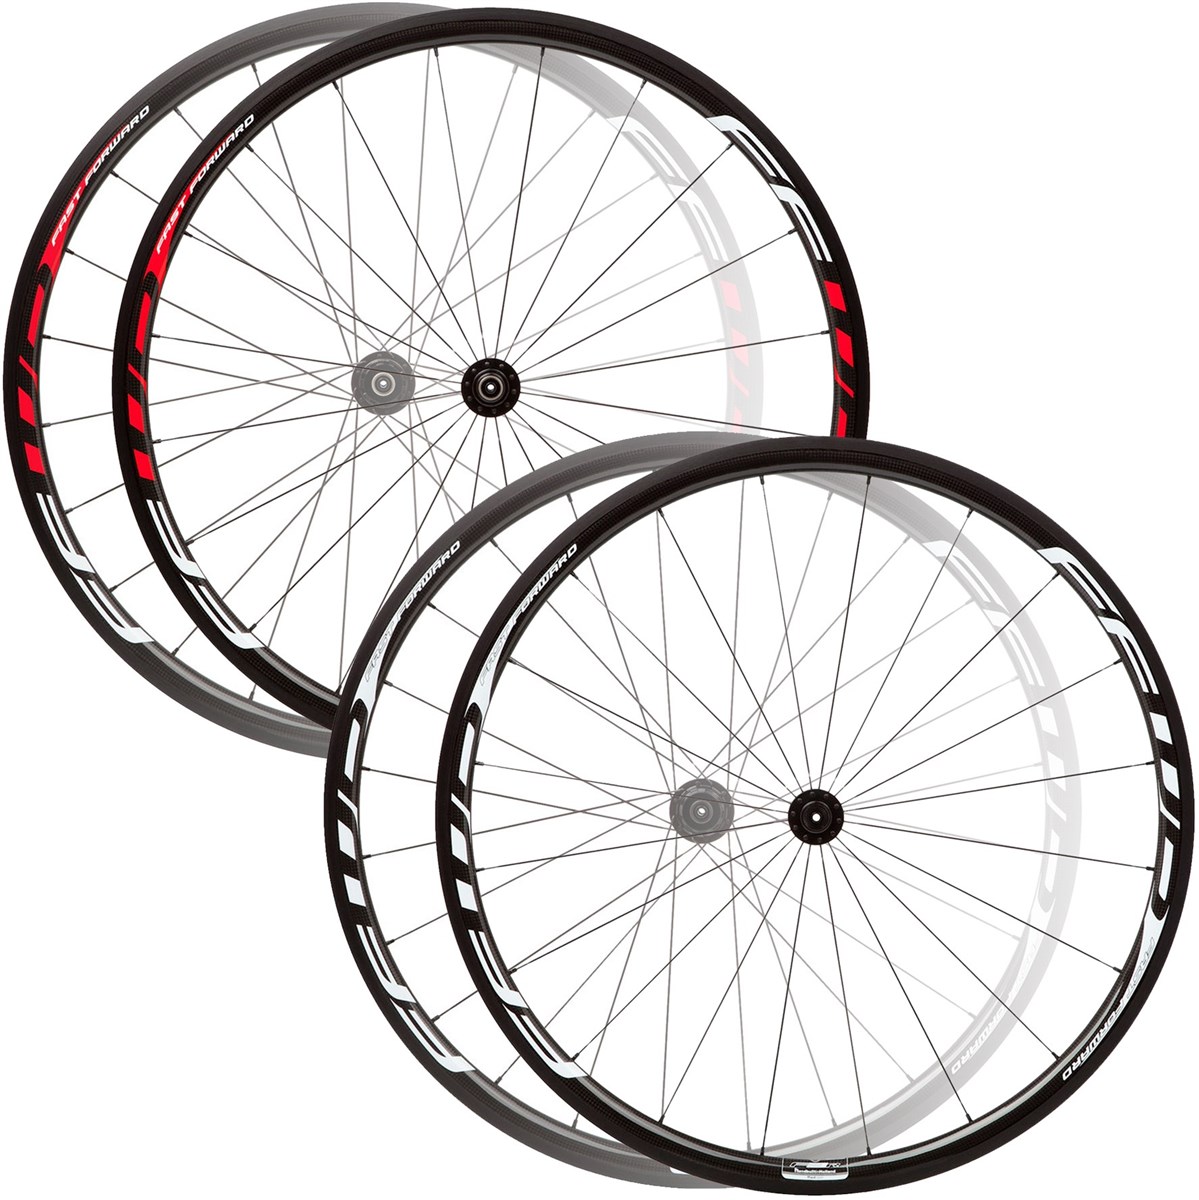 Fast Forward F3R Full Carbon Clincher 700c Road Wheelset product image